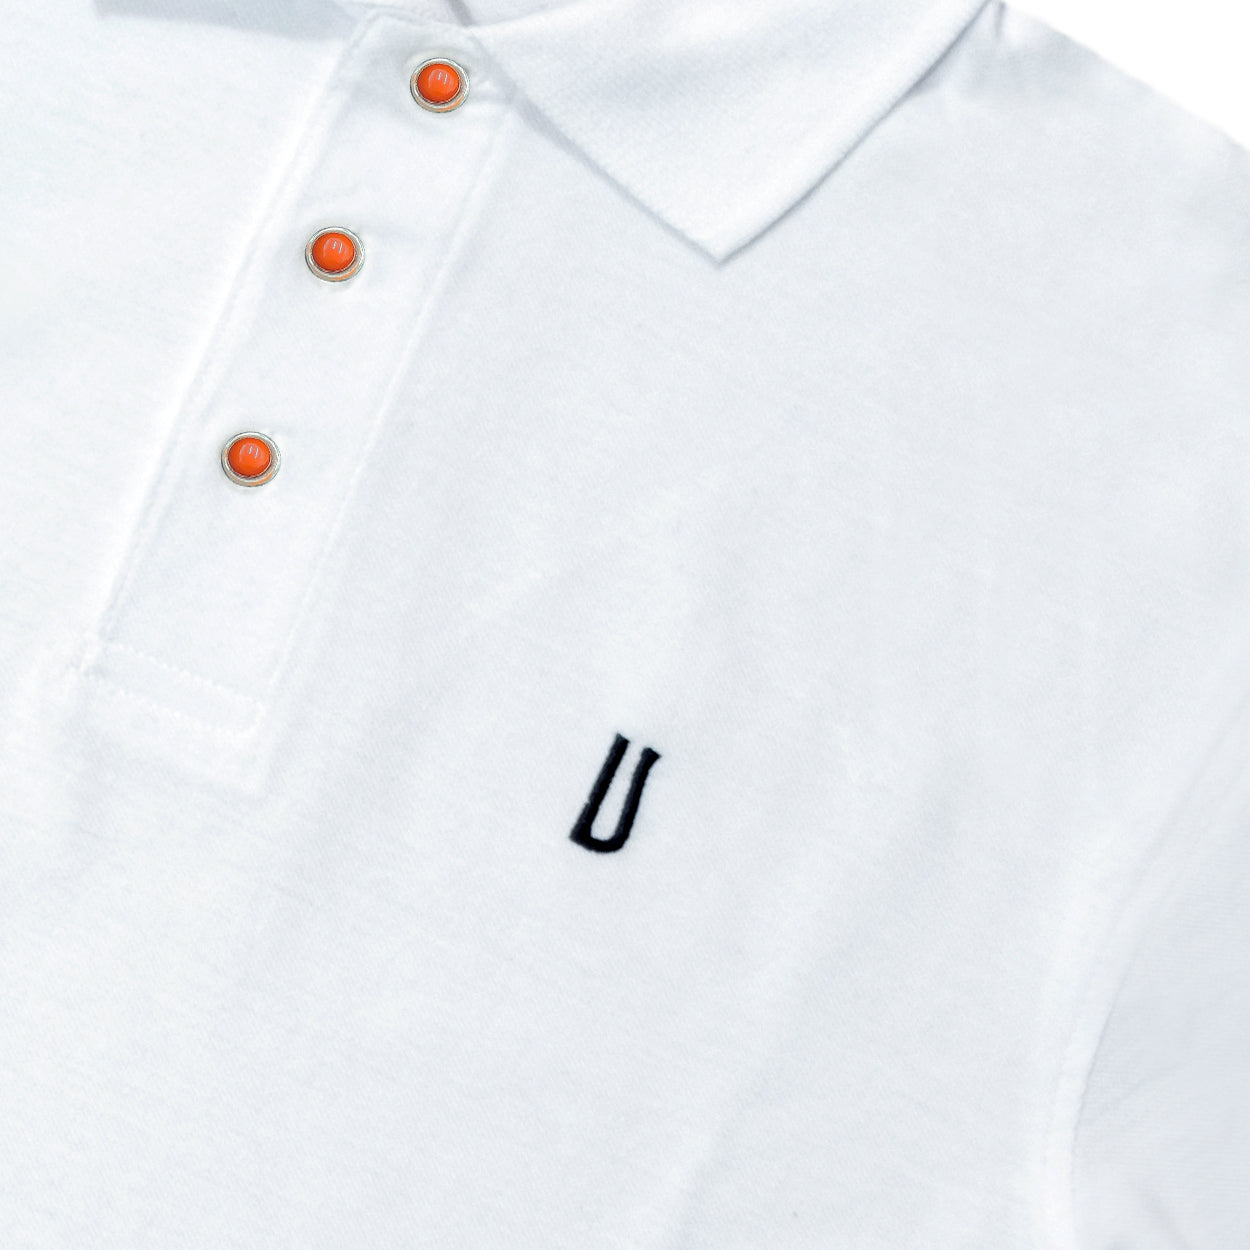 White polo shirt with coral and silver buttons